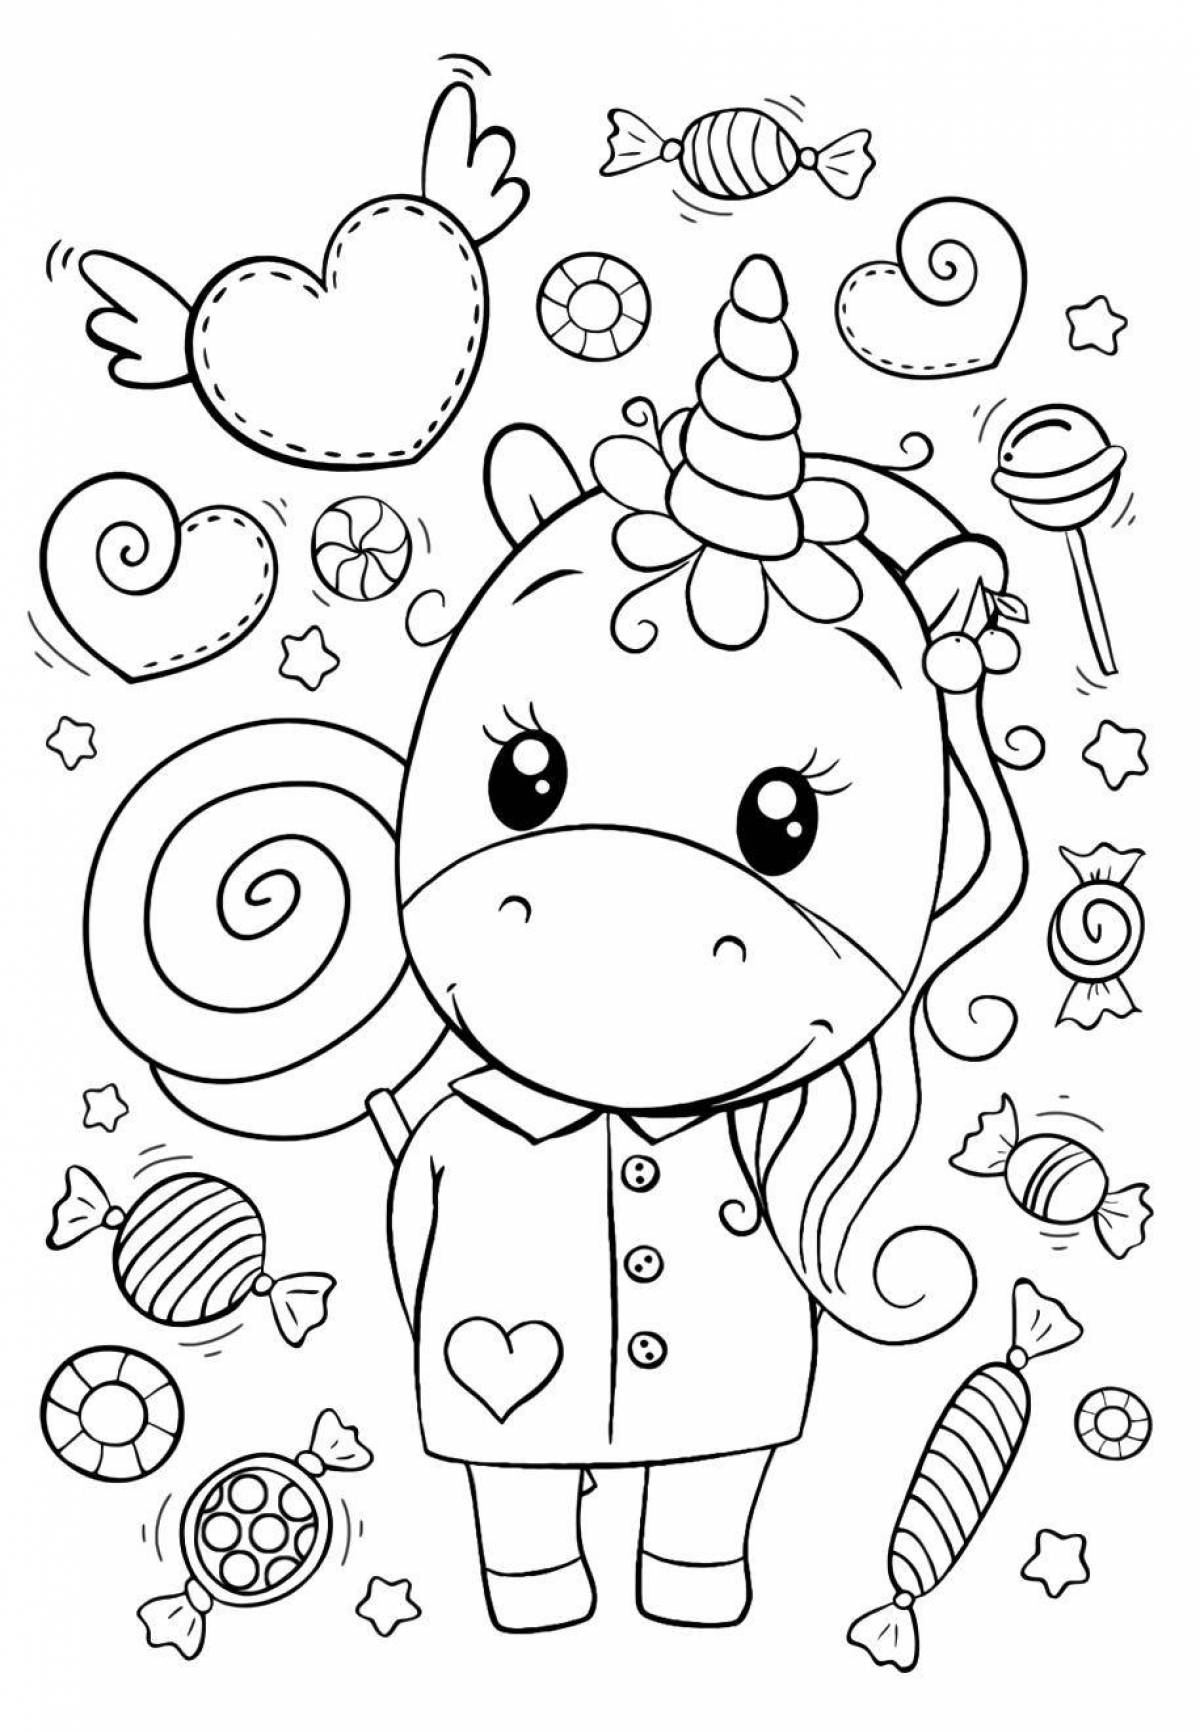 Fairytale coloring book for girls cute unicorns